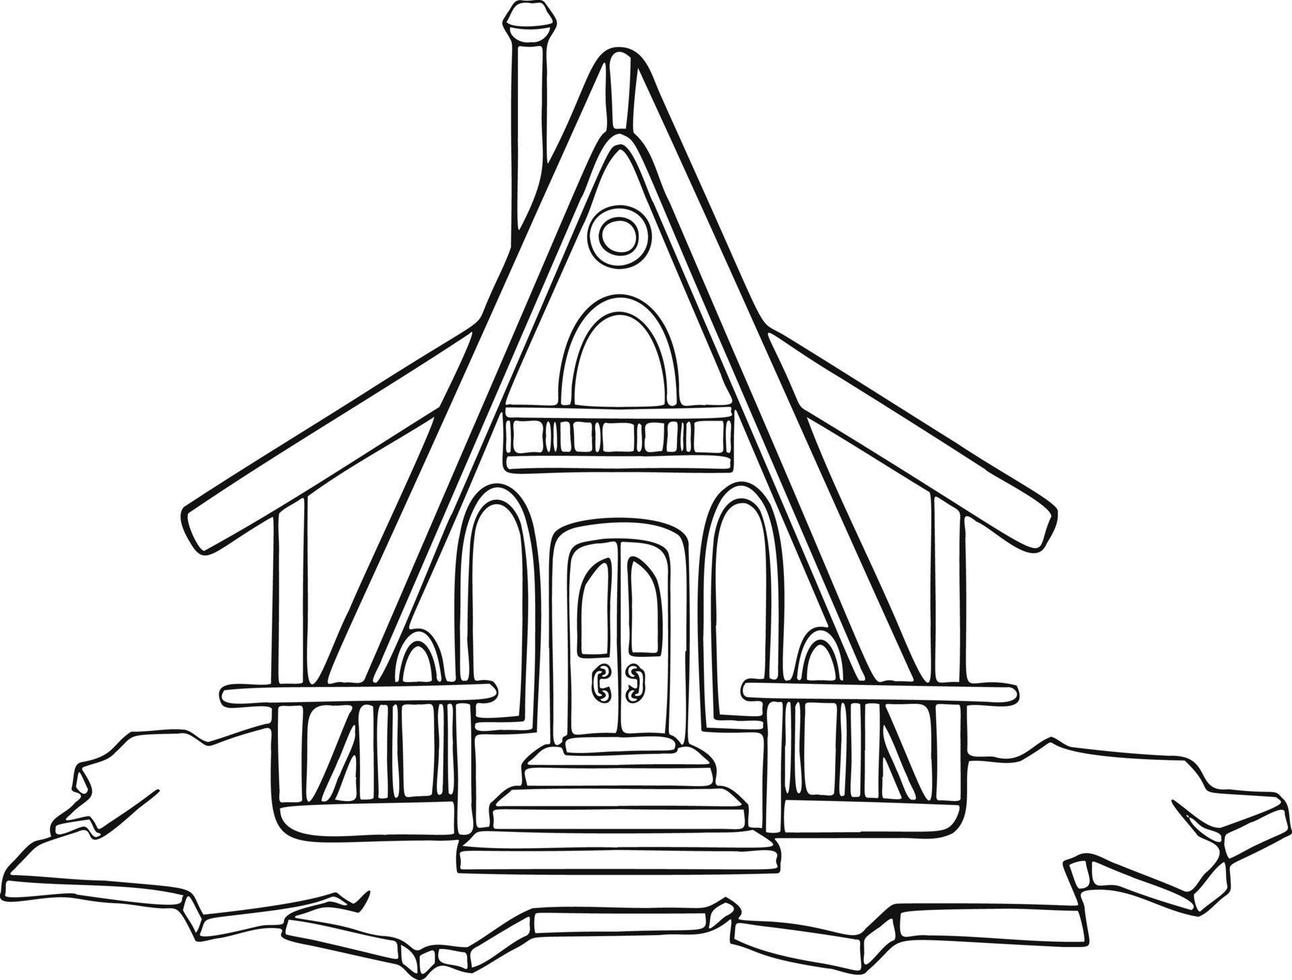 Coloring book, winter night house in the mountains vector